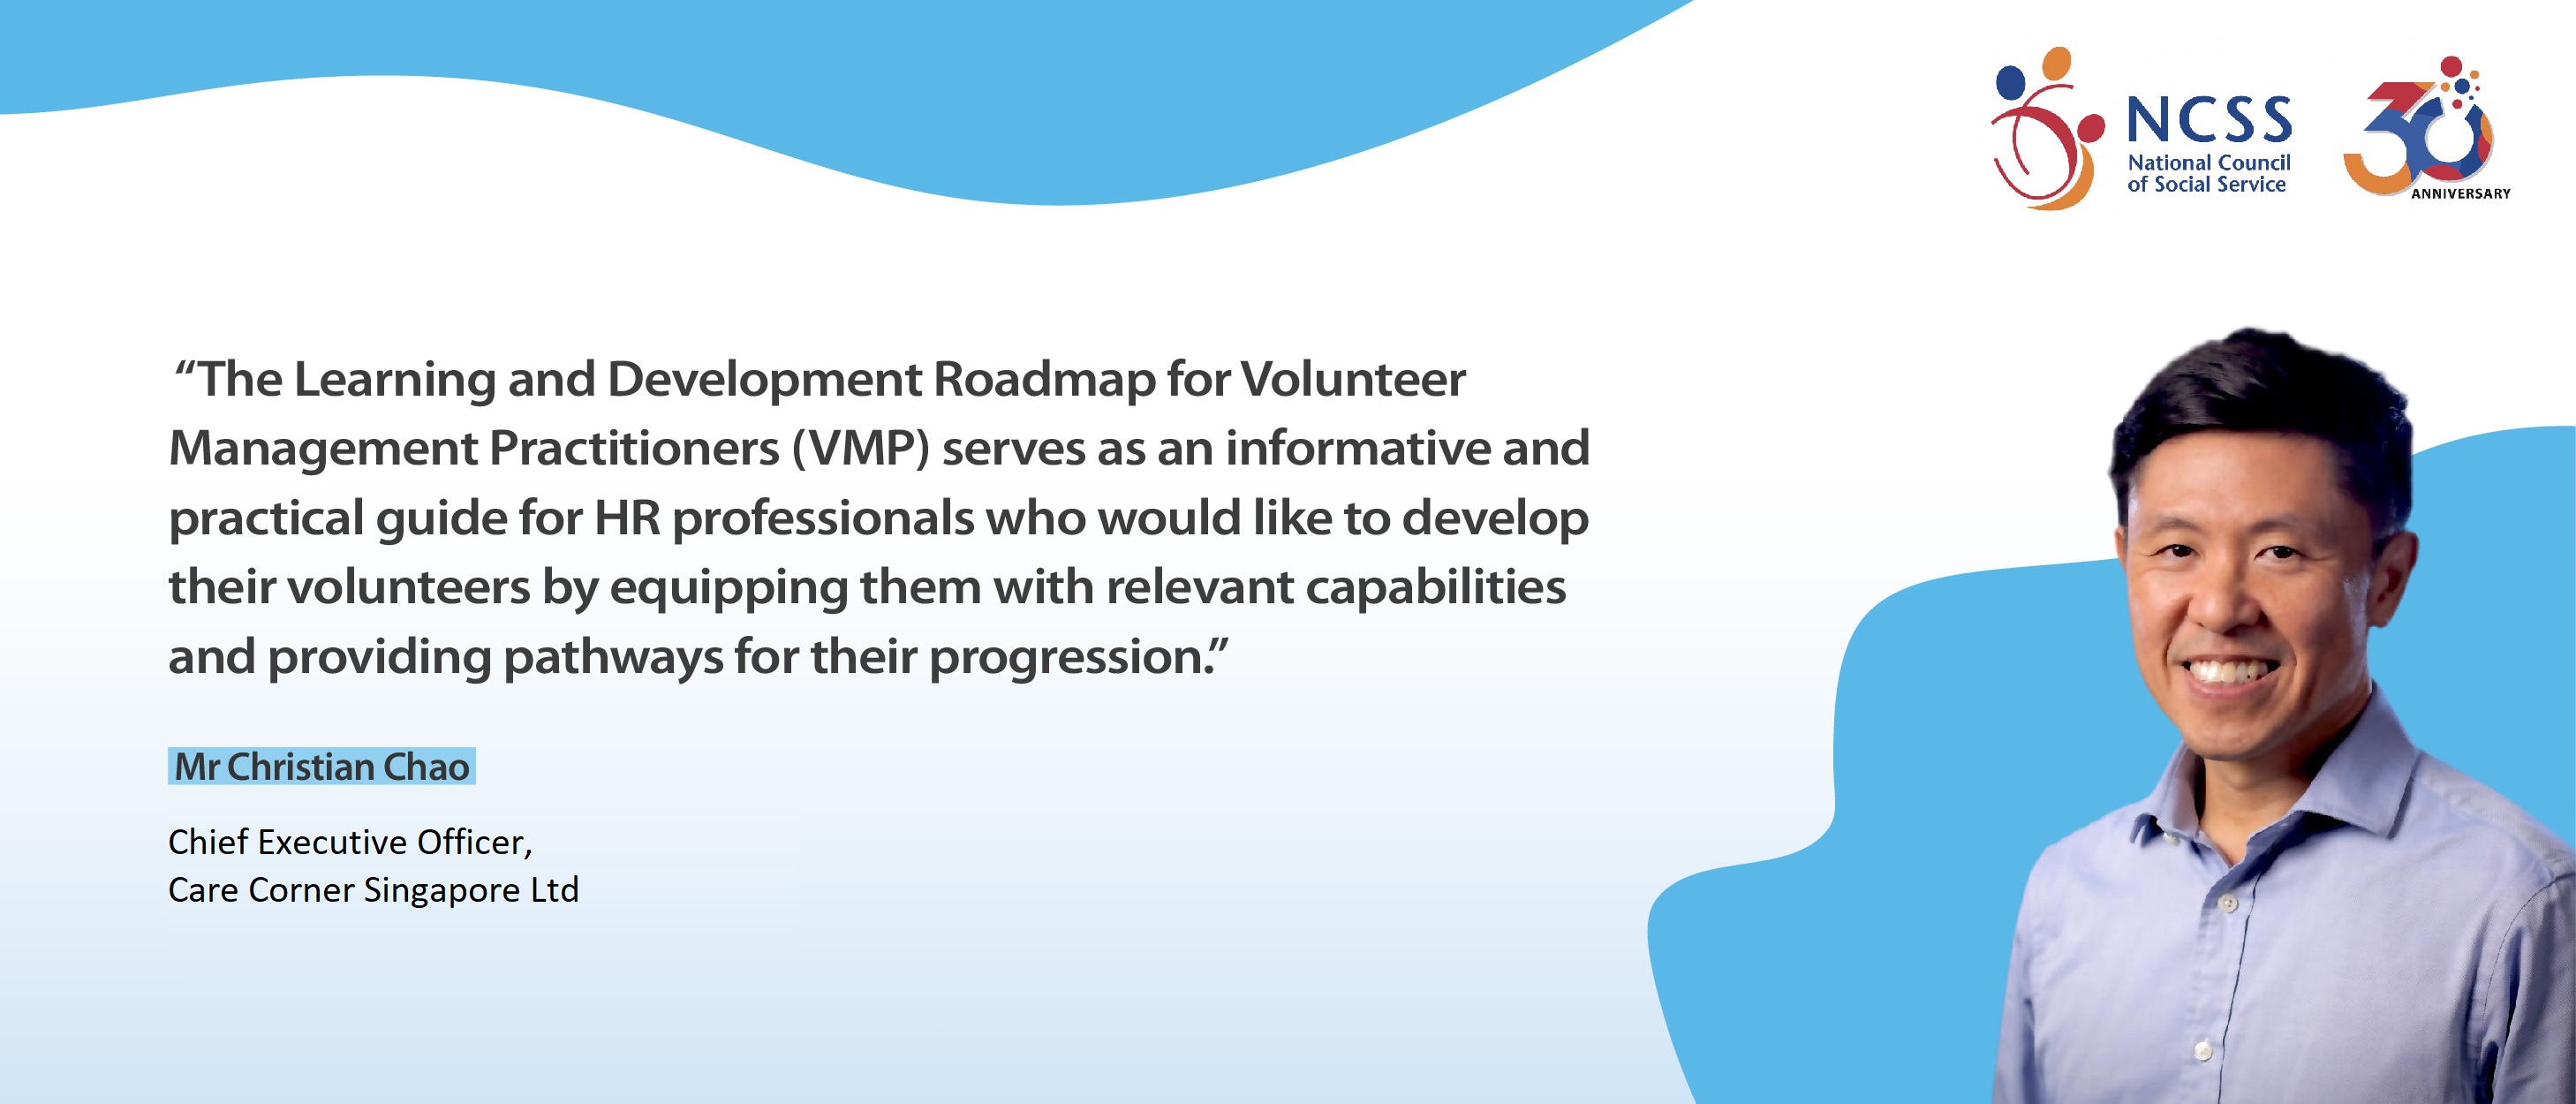 A comment about Learning  Development Roadmap by Senior director of People from Care Corner Singapore Ltd, Mr Christian Chao, "The Learning and development roadmap for volunteer management practitioners (vmp) serves as an informative and practical guide for HR professionals who would like to develop their volunteers by equipping them with relevant capabilities and providing pathways for their progression."